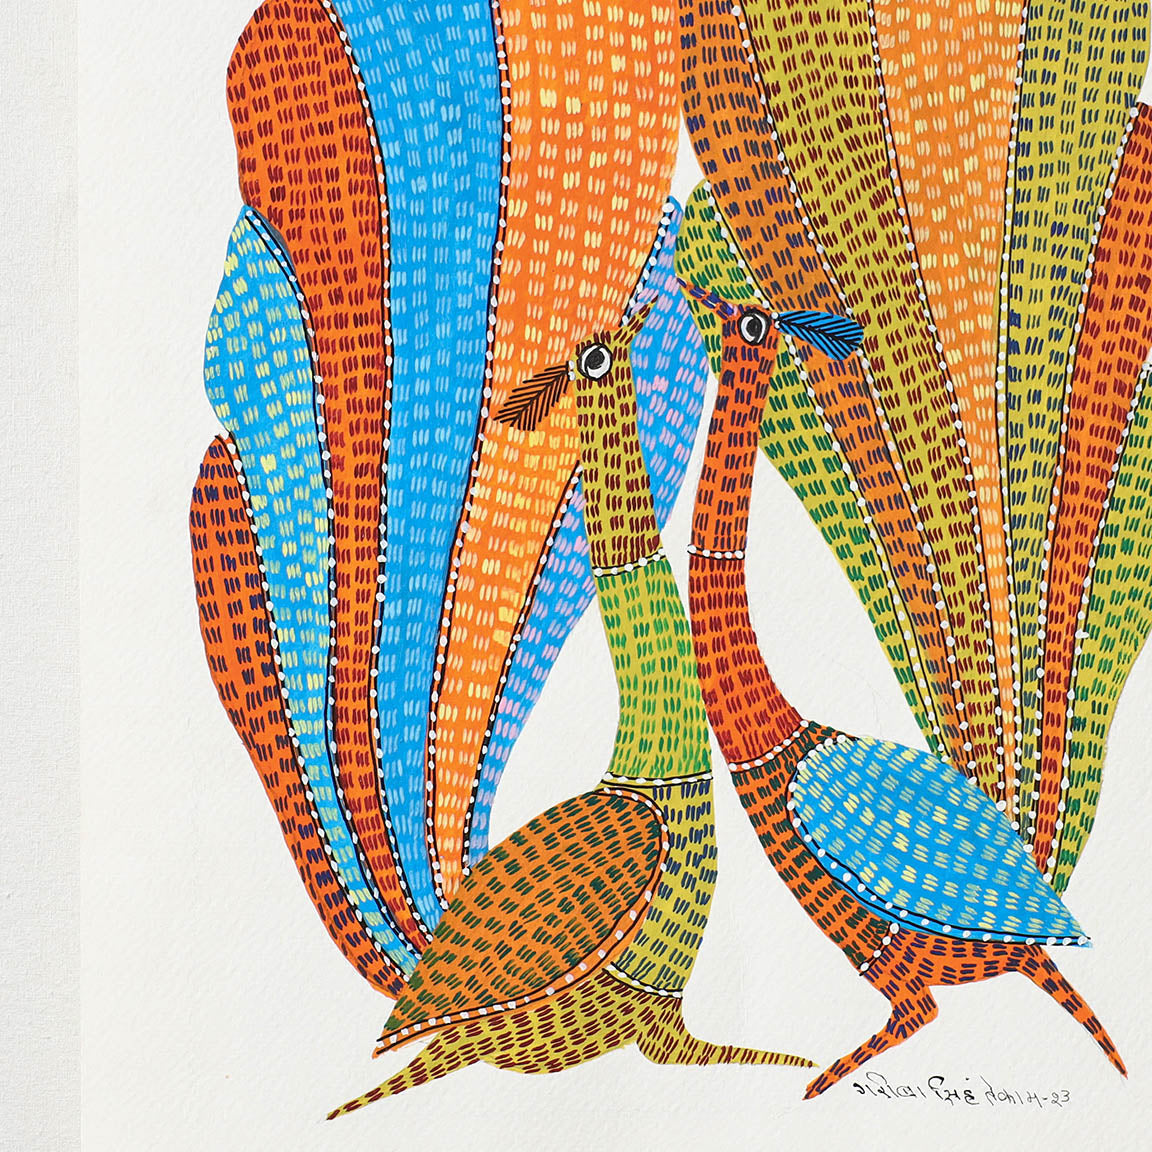 Gond Painting